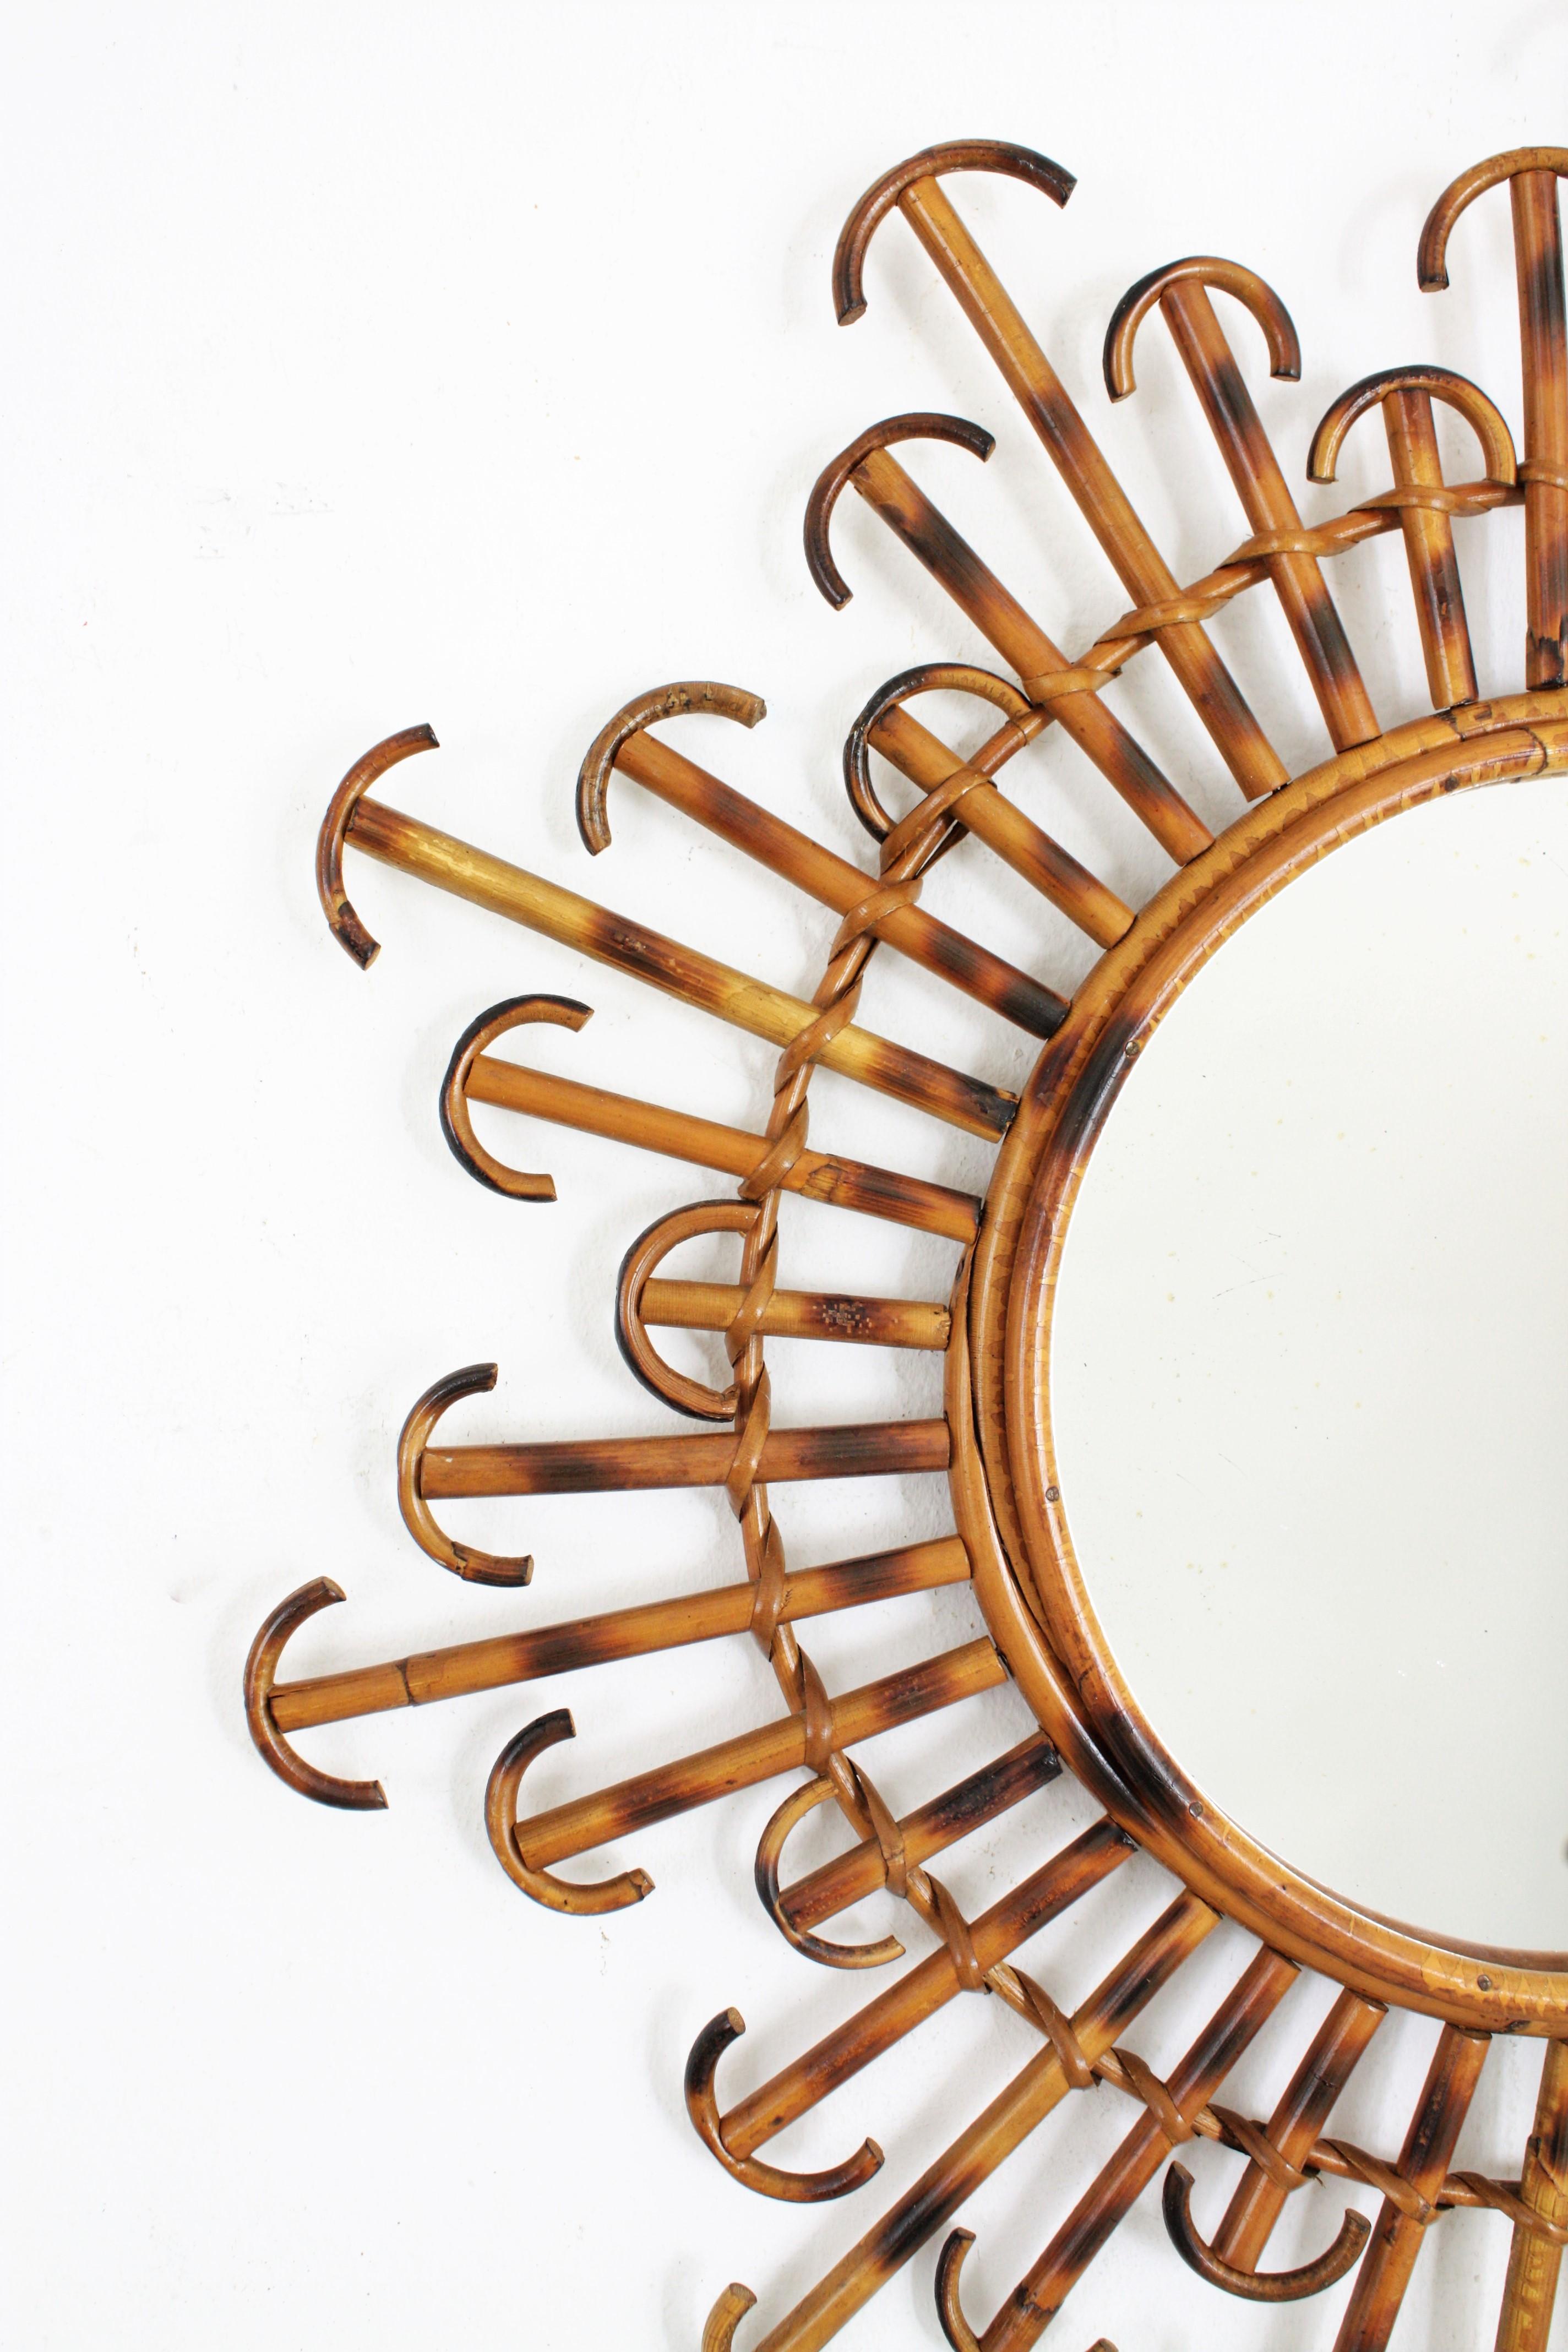 20th Century French Rattan Wicker Sunburst Mirror with Curved Endings, 1950s